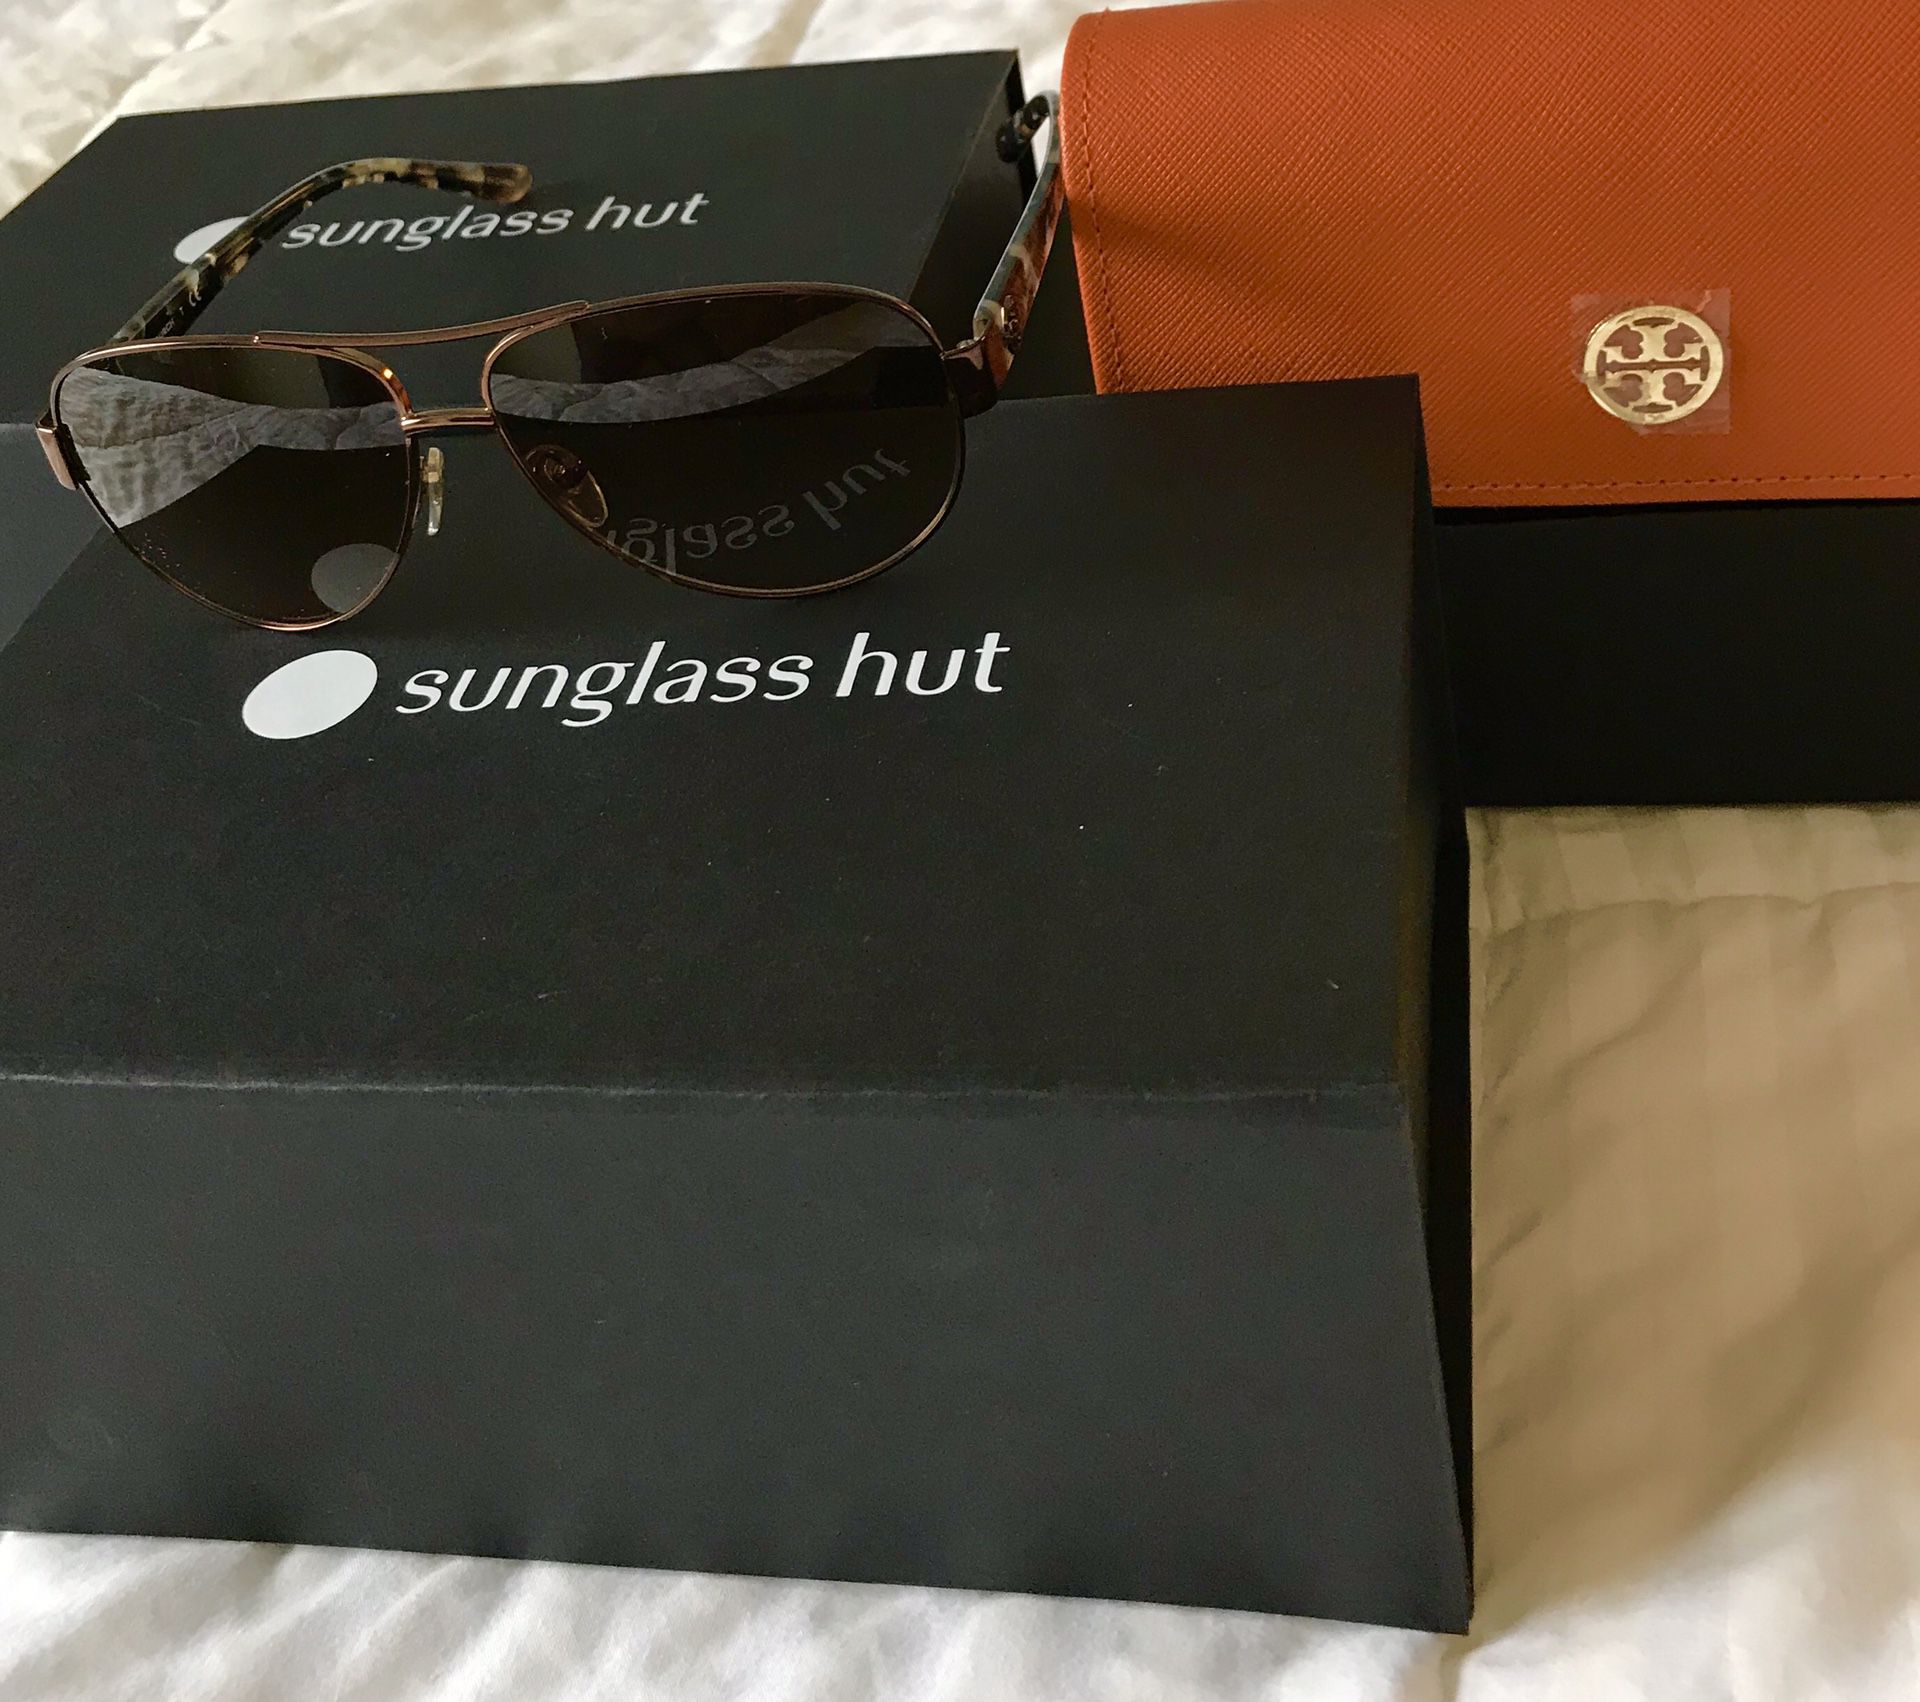 5 Name brand sunglasses brand new with box from sunglass hut $150 each